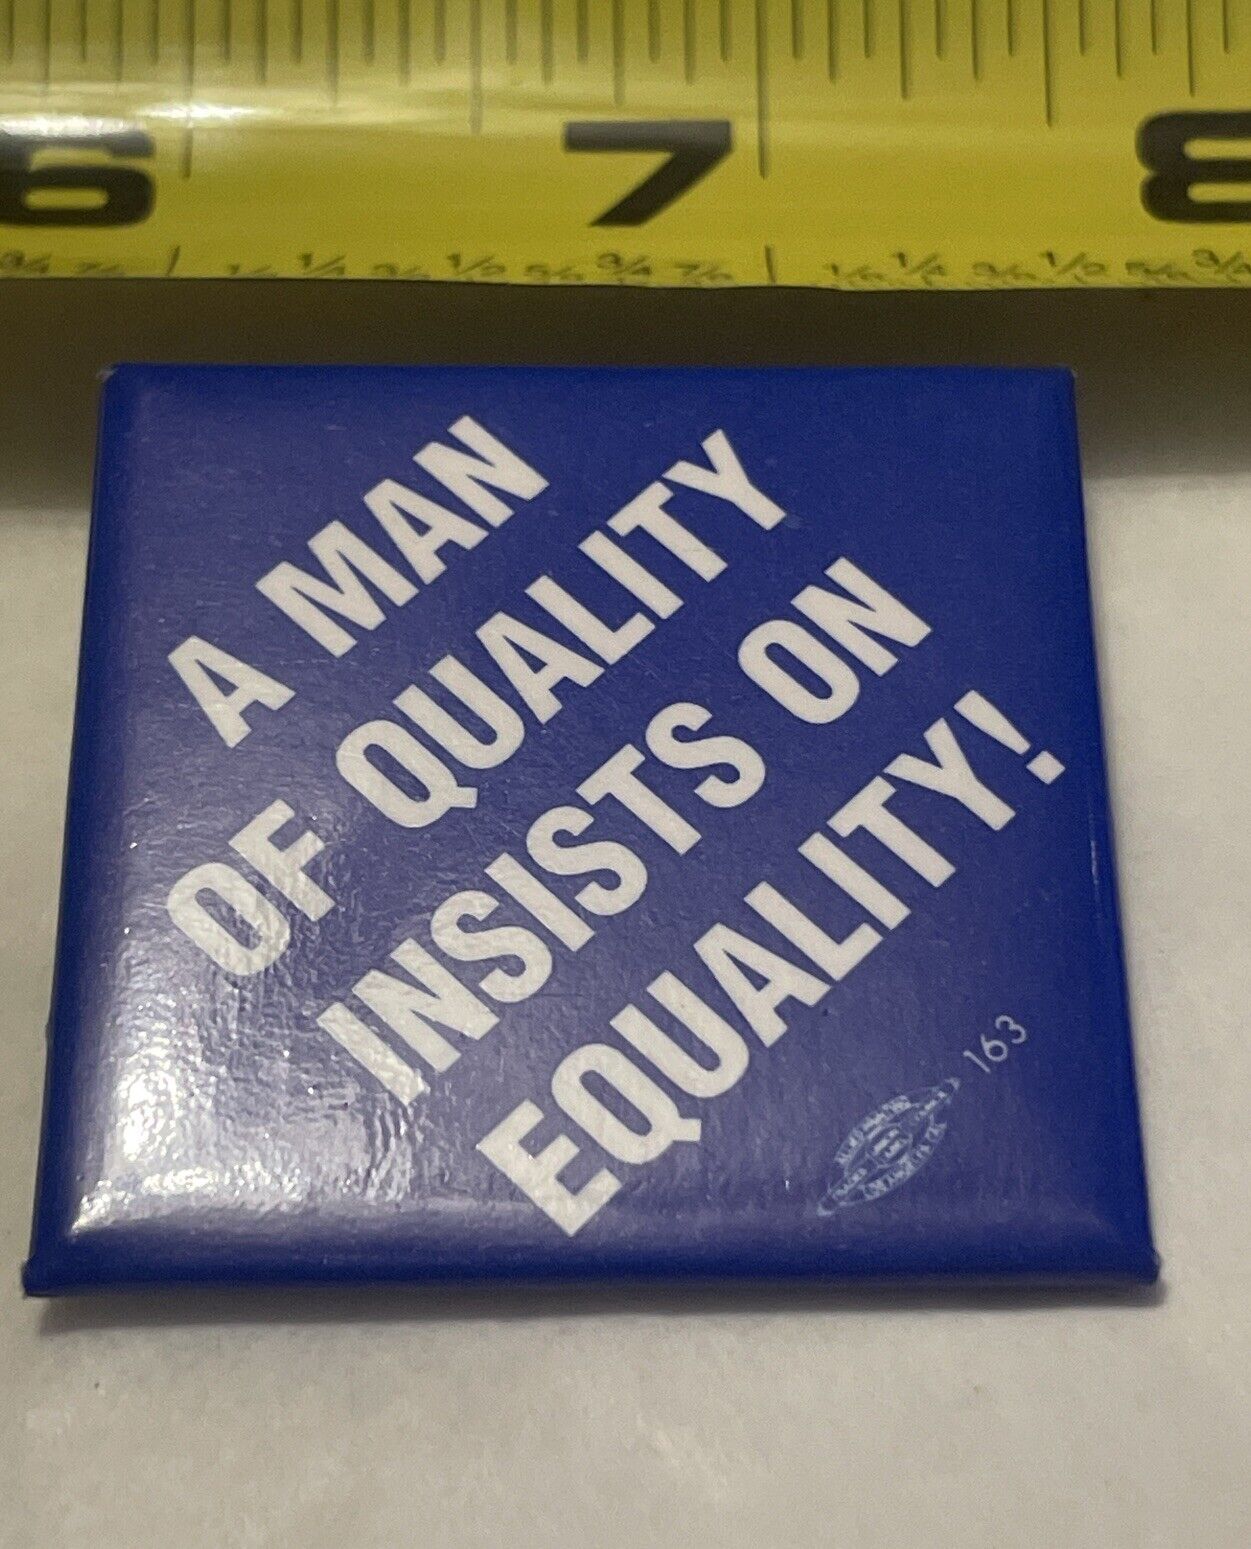 Vintage A Man Of Quality Insists On Equality! Button Без бренда - фотография #3